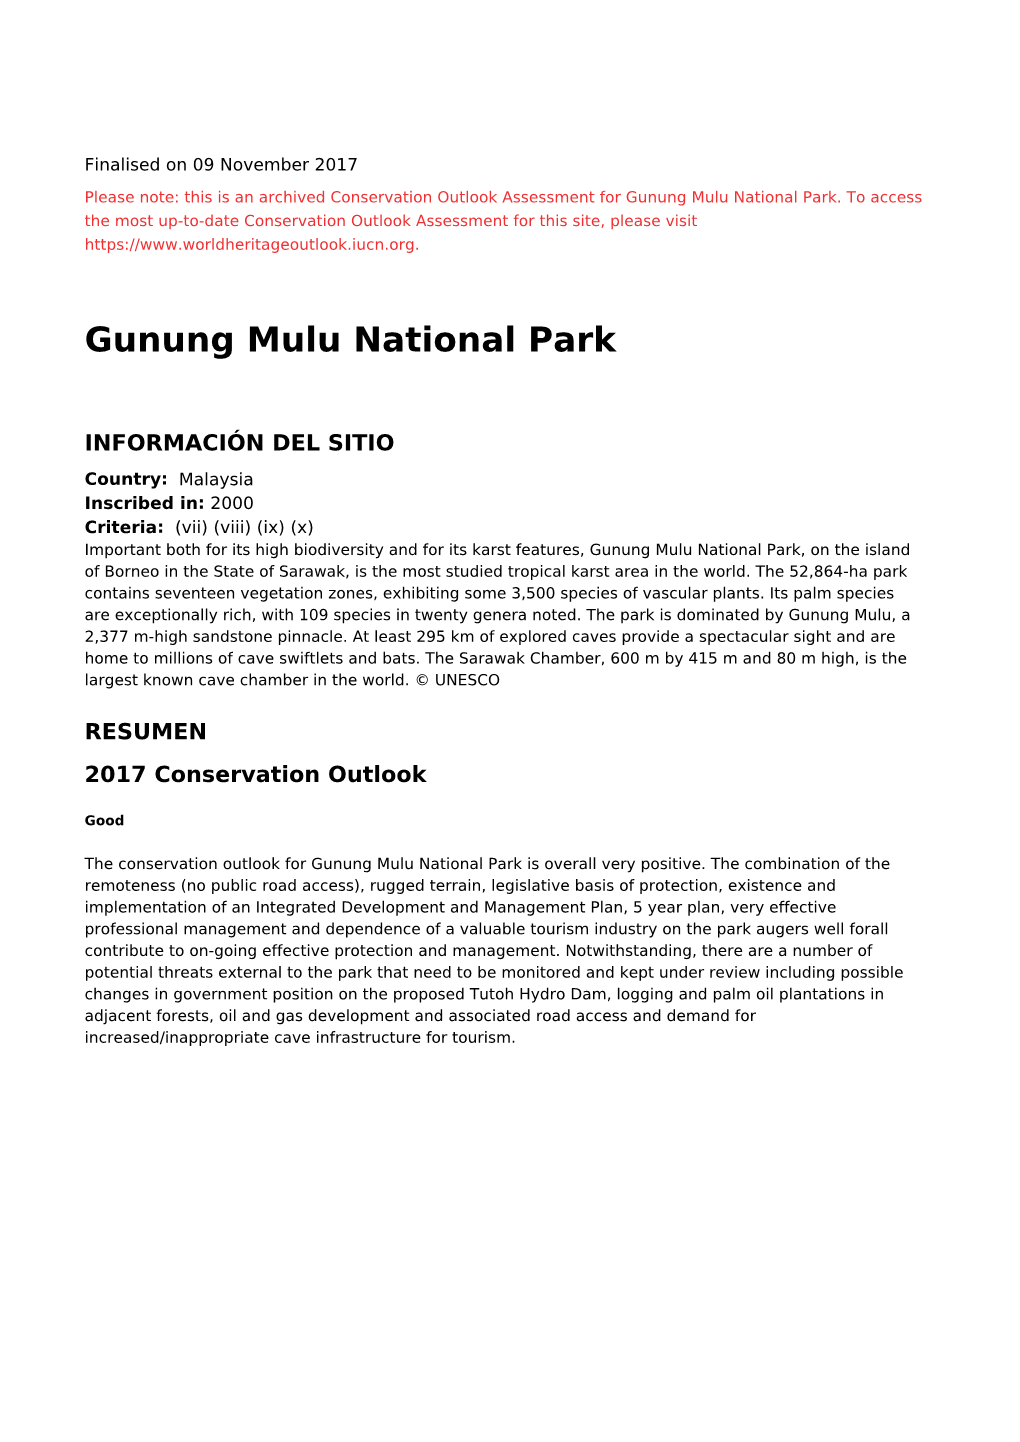 Gunung Mulu National Park - 2017 Conservation Outlook Assessment (Archived)